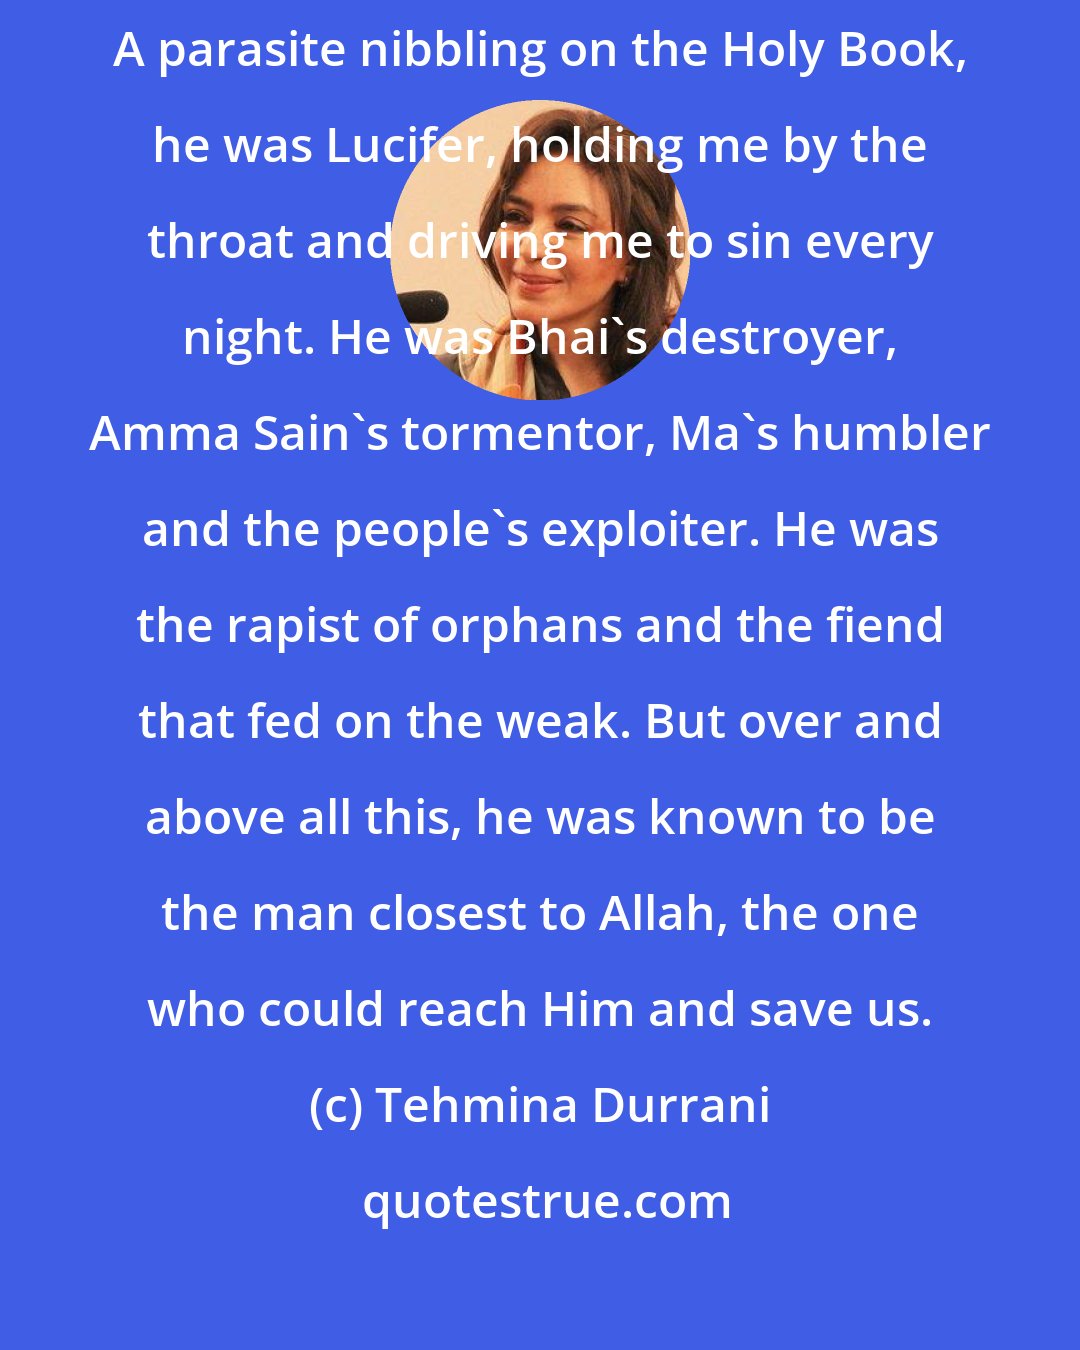 Tehmina Durrani: To me, my husband was my son's murderer. He was also my daughter's molester. A parasite nibbling on the Holy Book, he was Lucifer, holding me by the throat and driving me to sin every night. He was Bhai's destroyer, Amma Sain's tormentor, Ma's humbler and the people's exploiter. He was the rapist of orphans and the fiend that fed on the weak. But over and above all this, he was known to be the man closest to Allah, the one who could reach Him and save us.